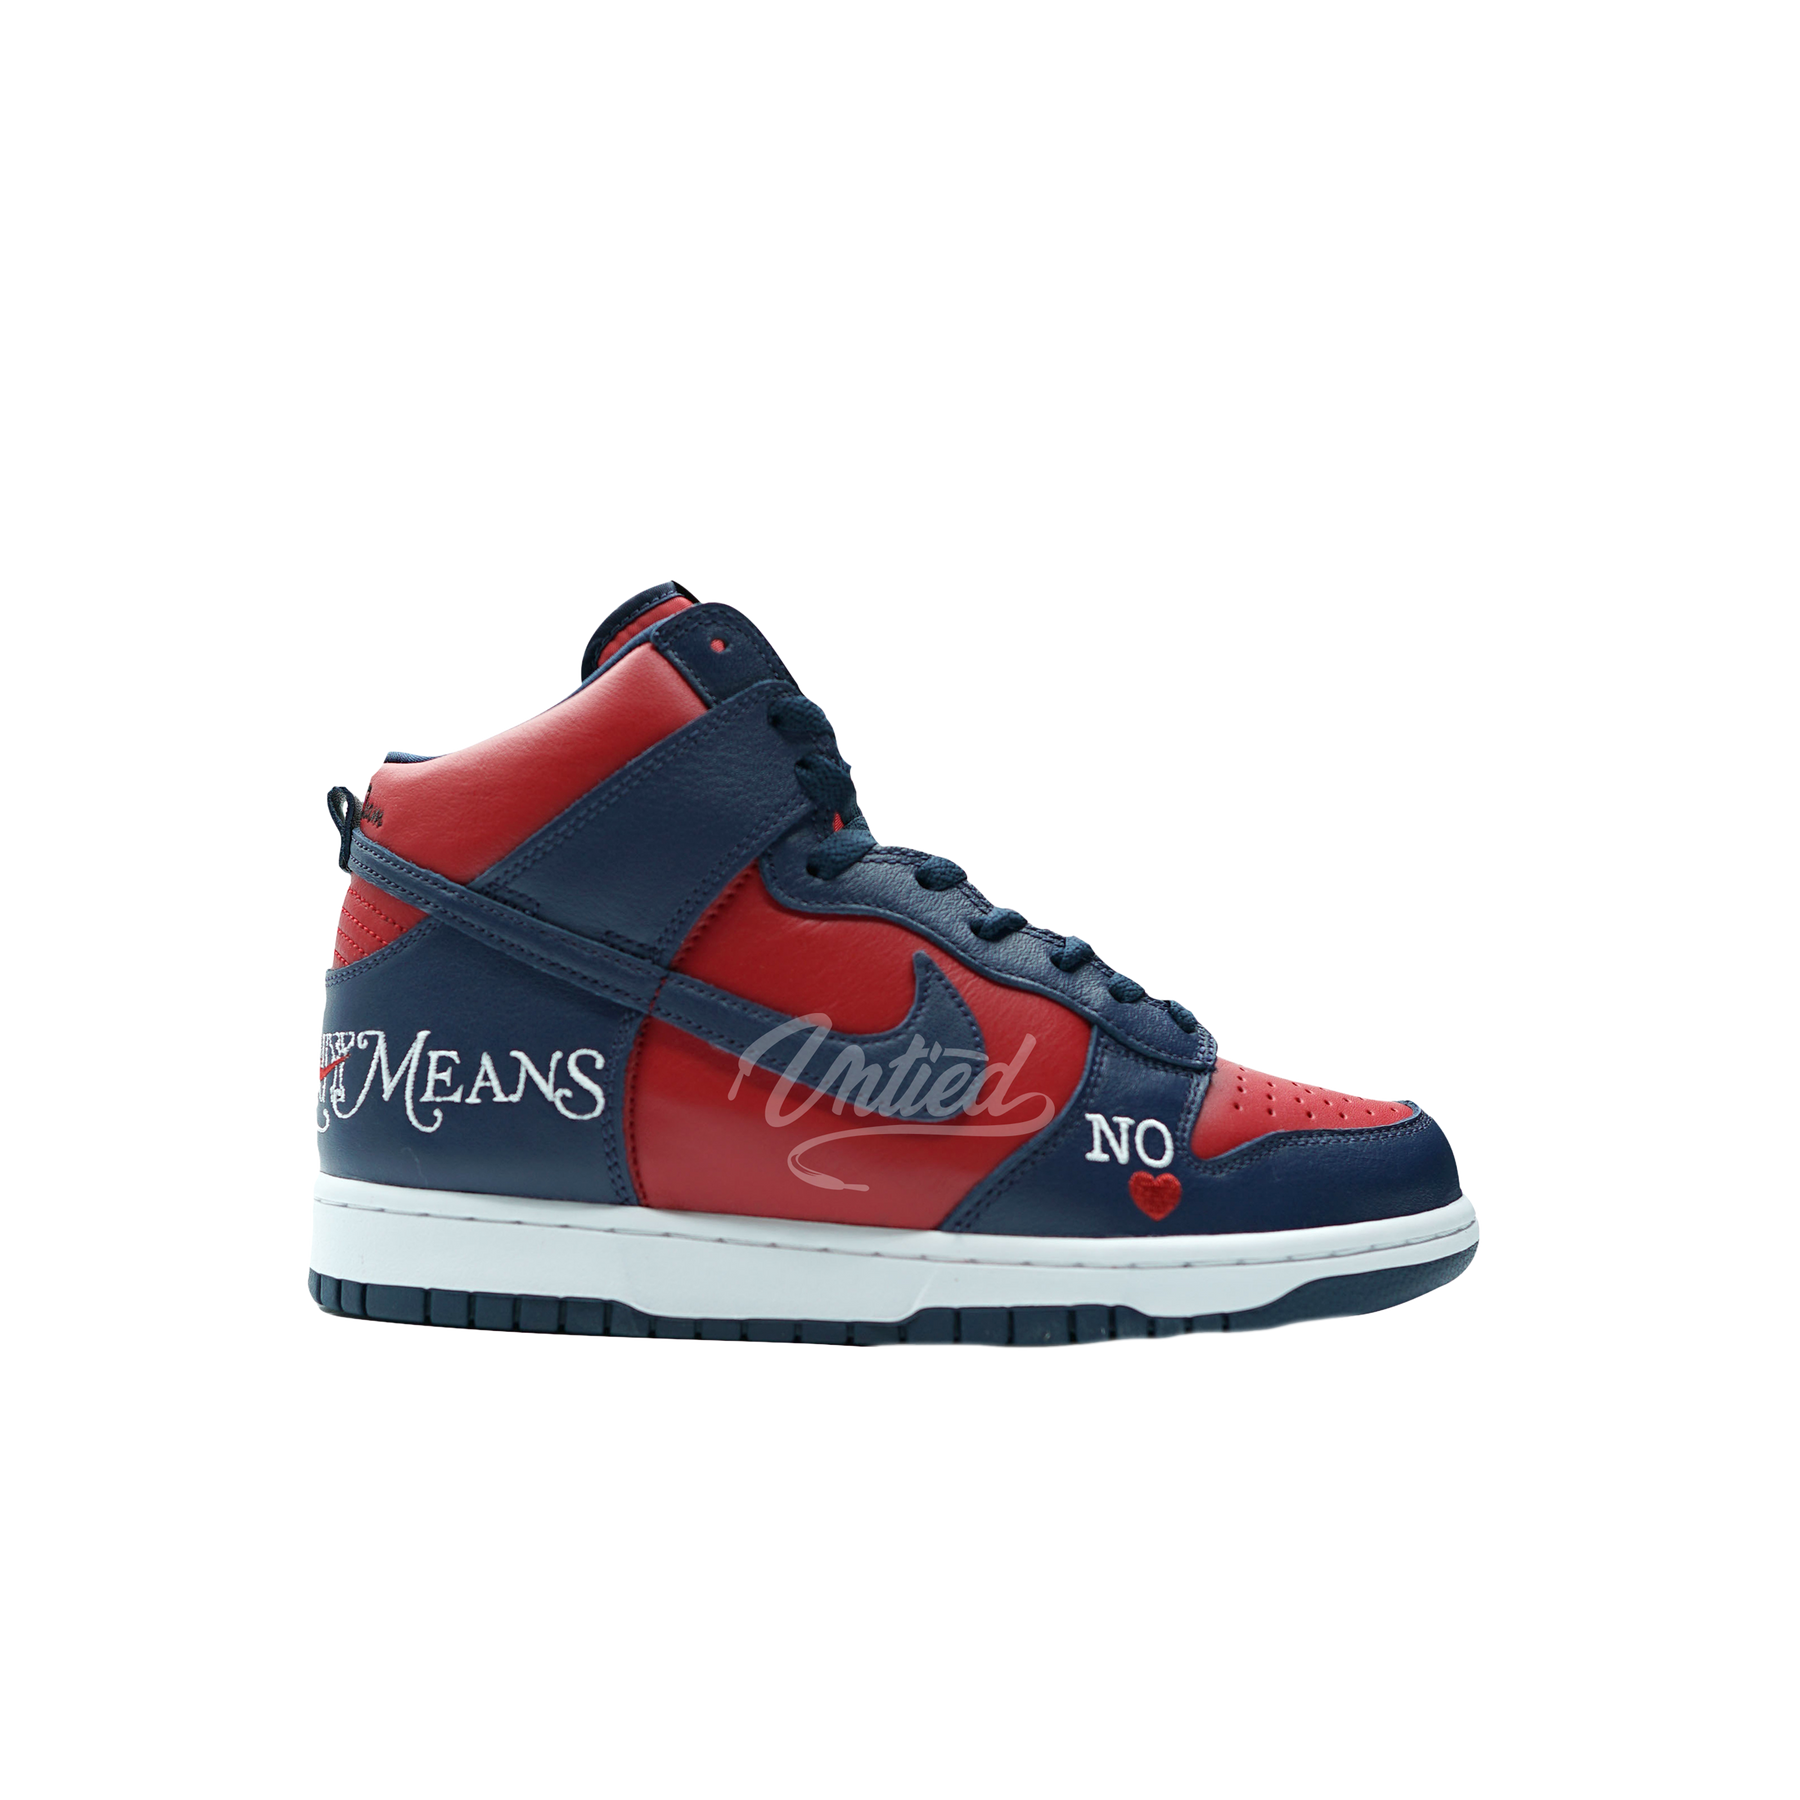 Supreme Nike SB Dunk High "By Any Means Navy"